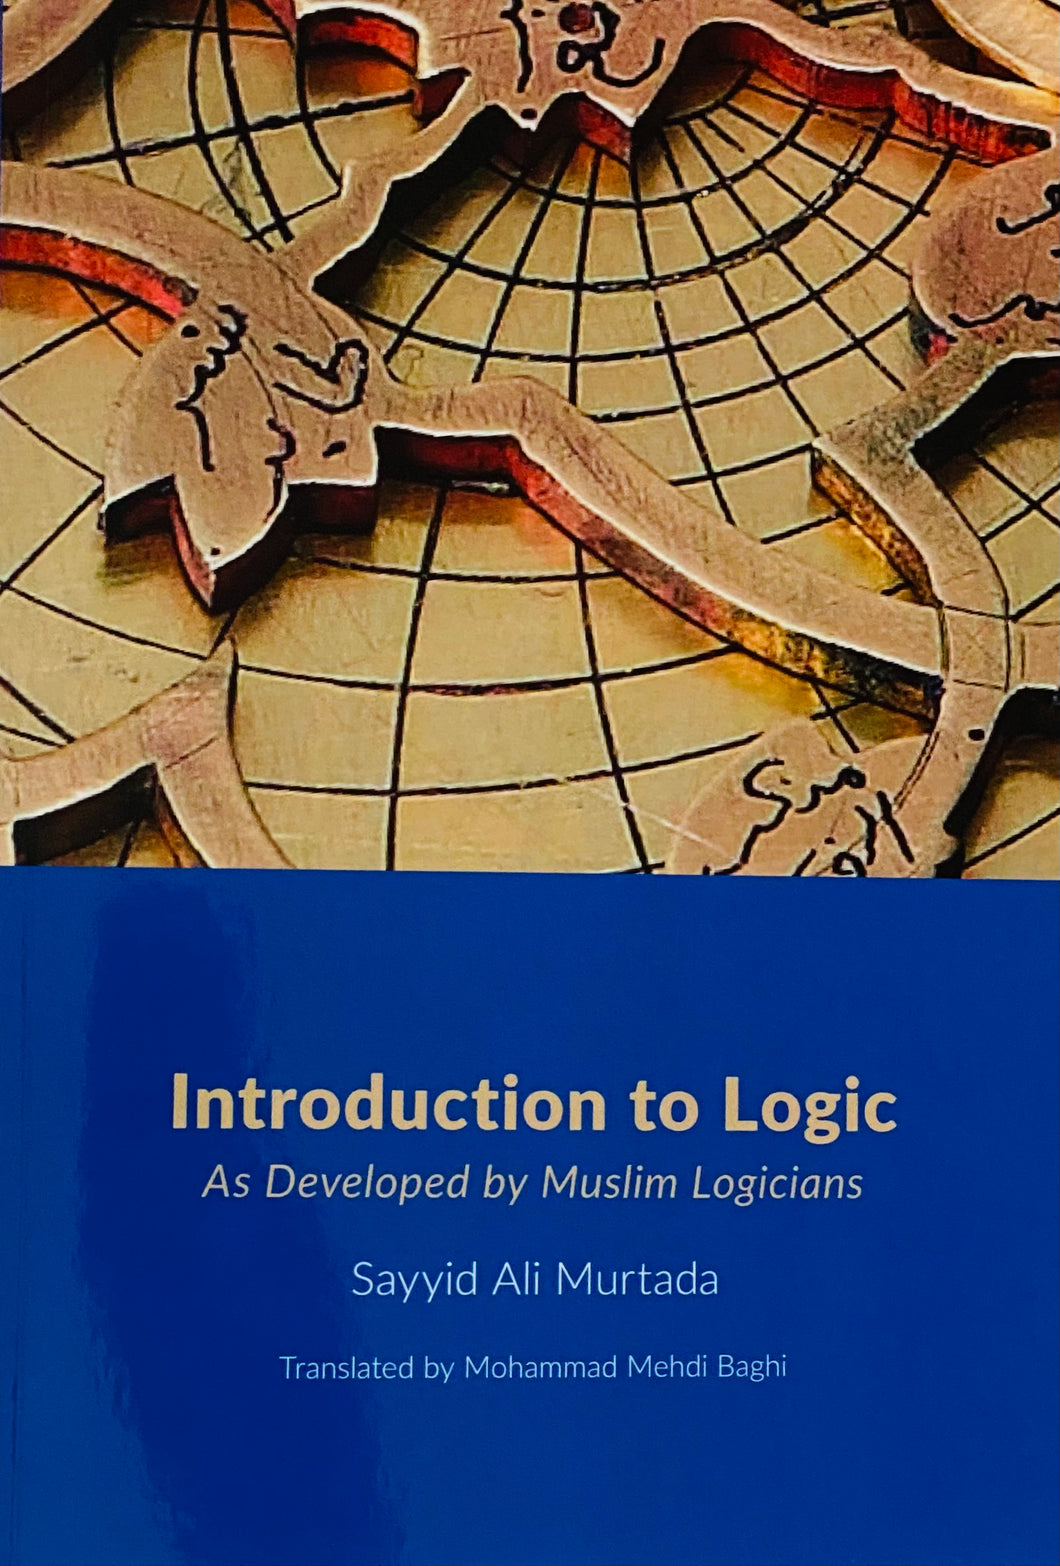 Introduction to Logic: As Developed by Muslim Logicians